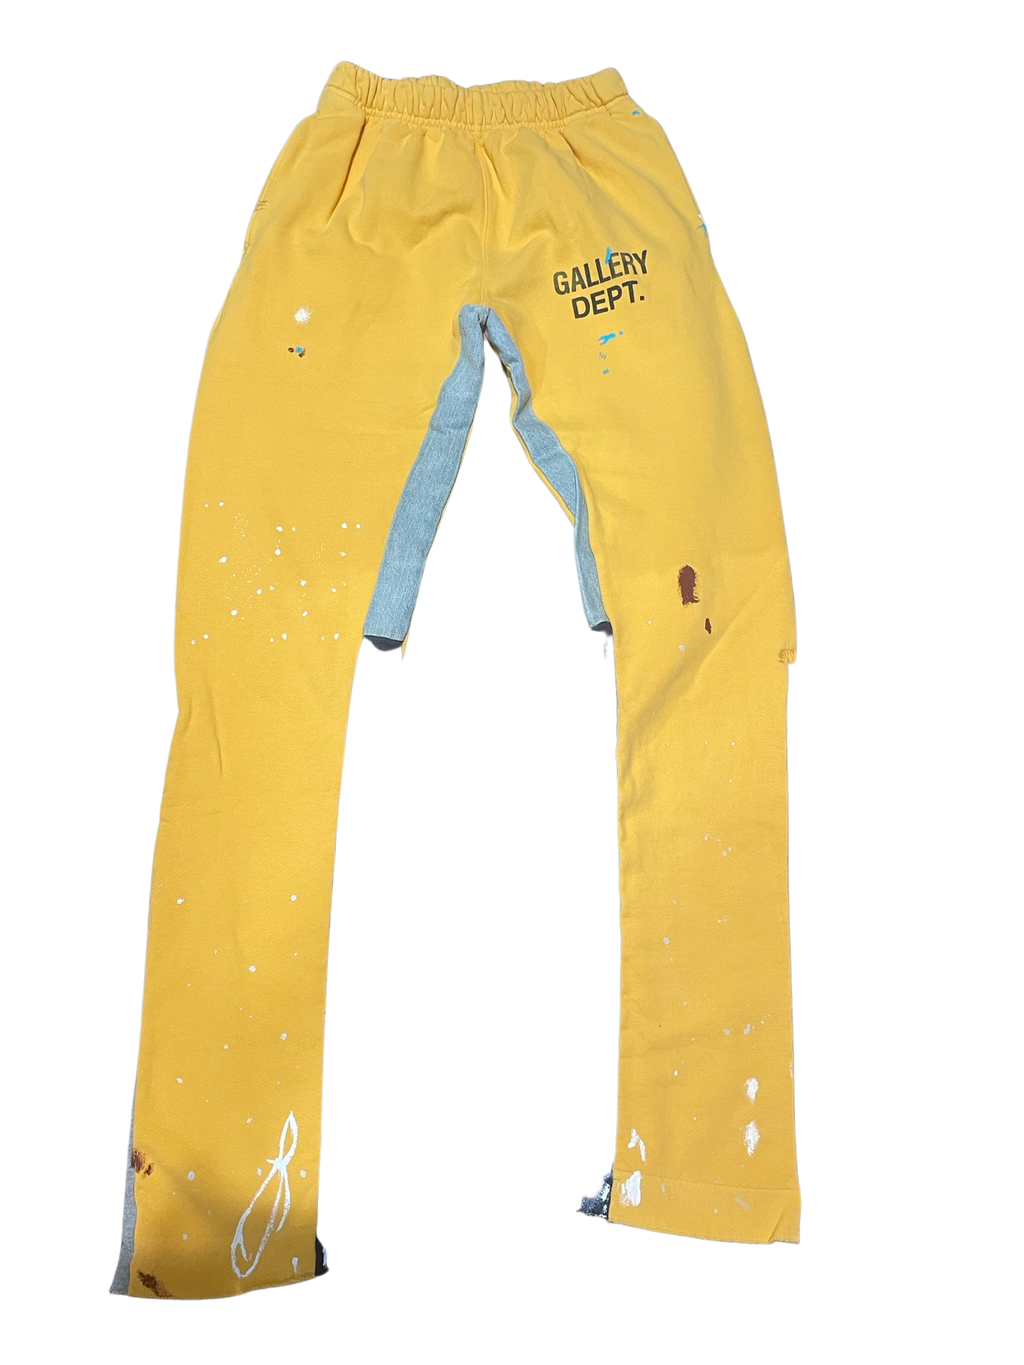 GALLERY DEPT FLARE SWEATPANT YELLOW